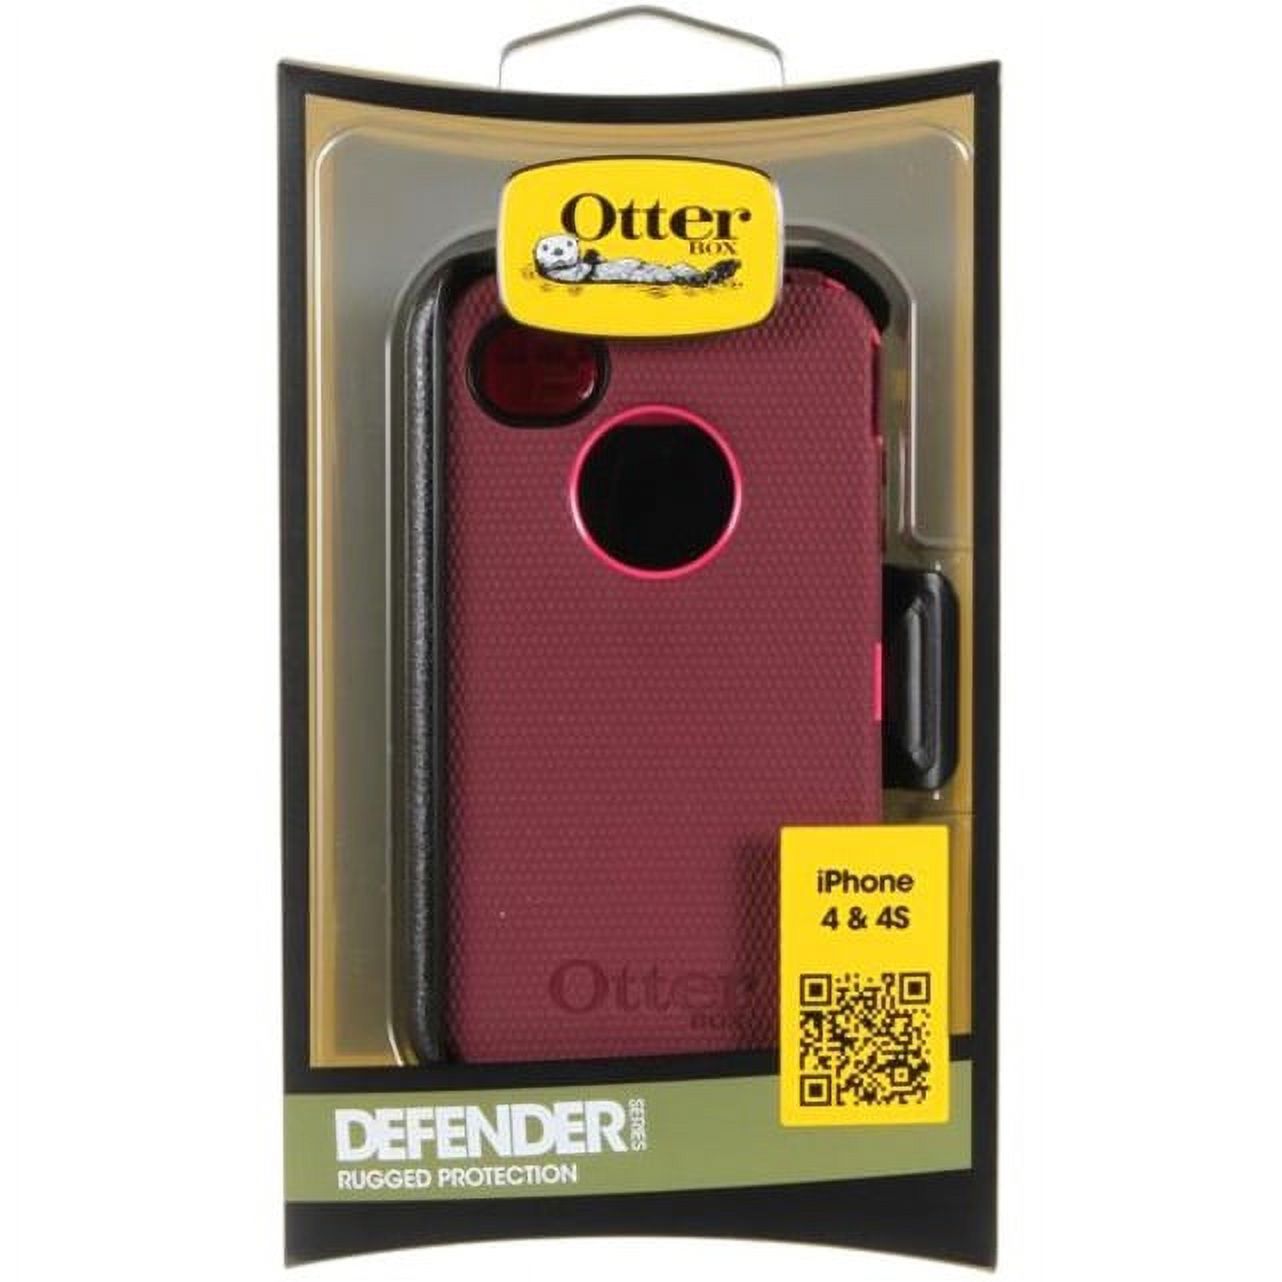 OtterBox Defender Rugged Carrying Case (Holster) Apple iPhone 4S, iPhone 4 Smartphone, Deep Plum, Peony Pink - image 1 of 5